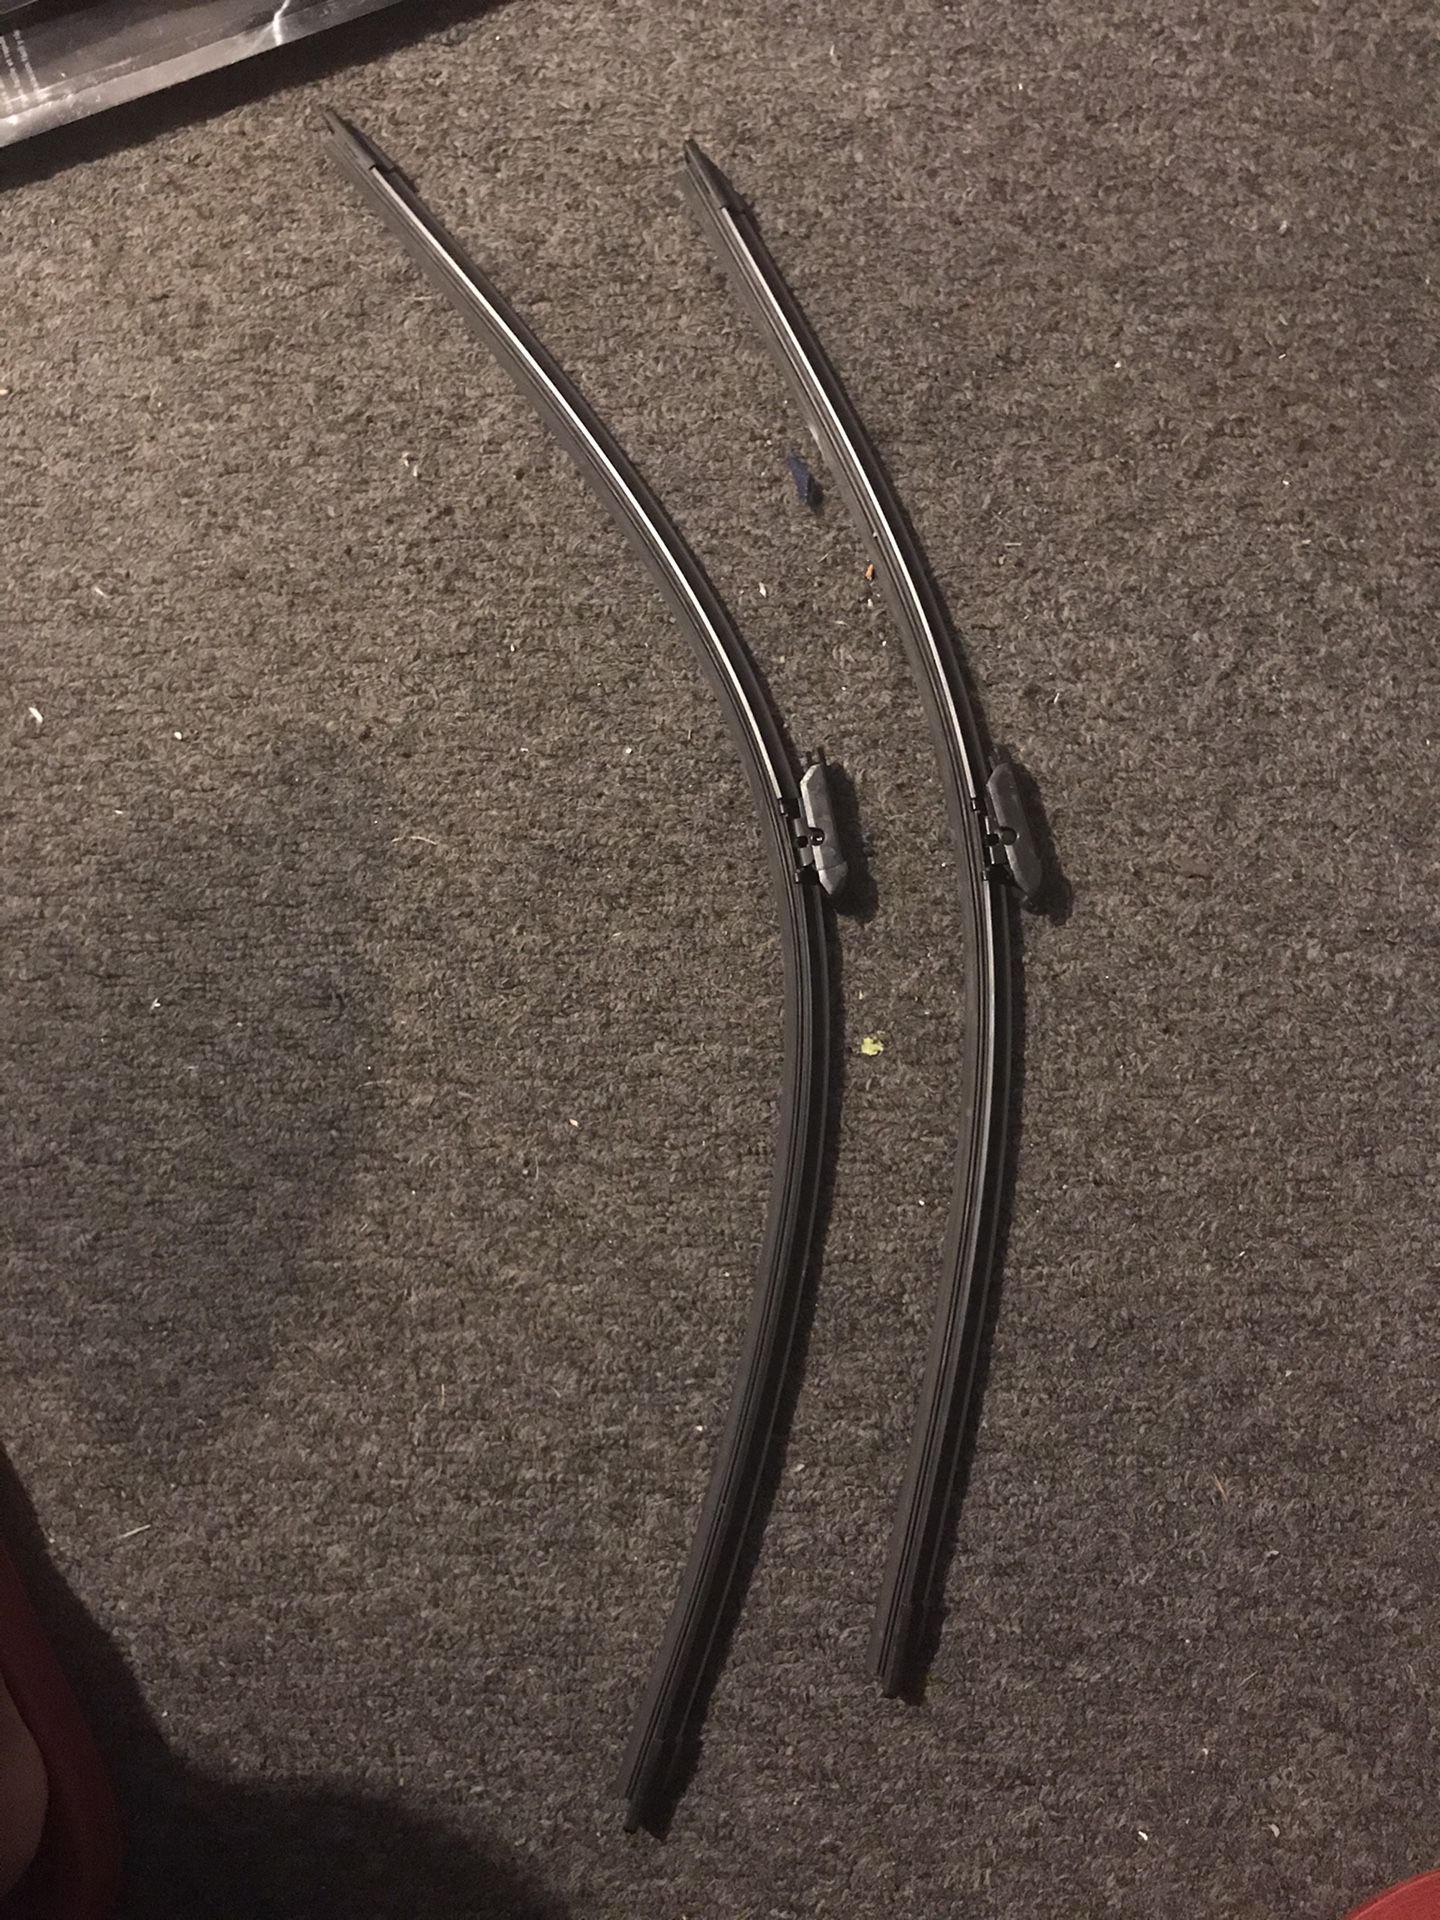 Chevy Cruze Wind Shield Wipers (2016)